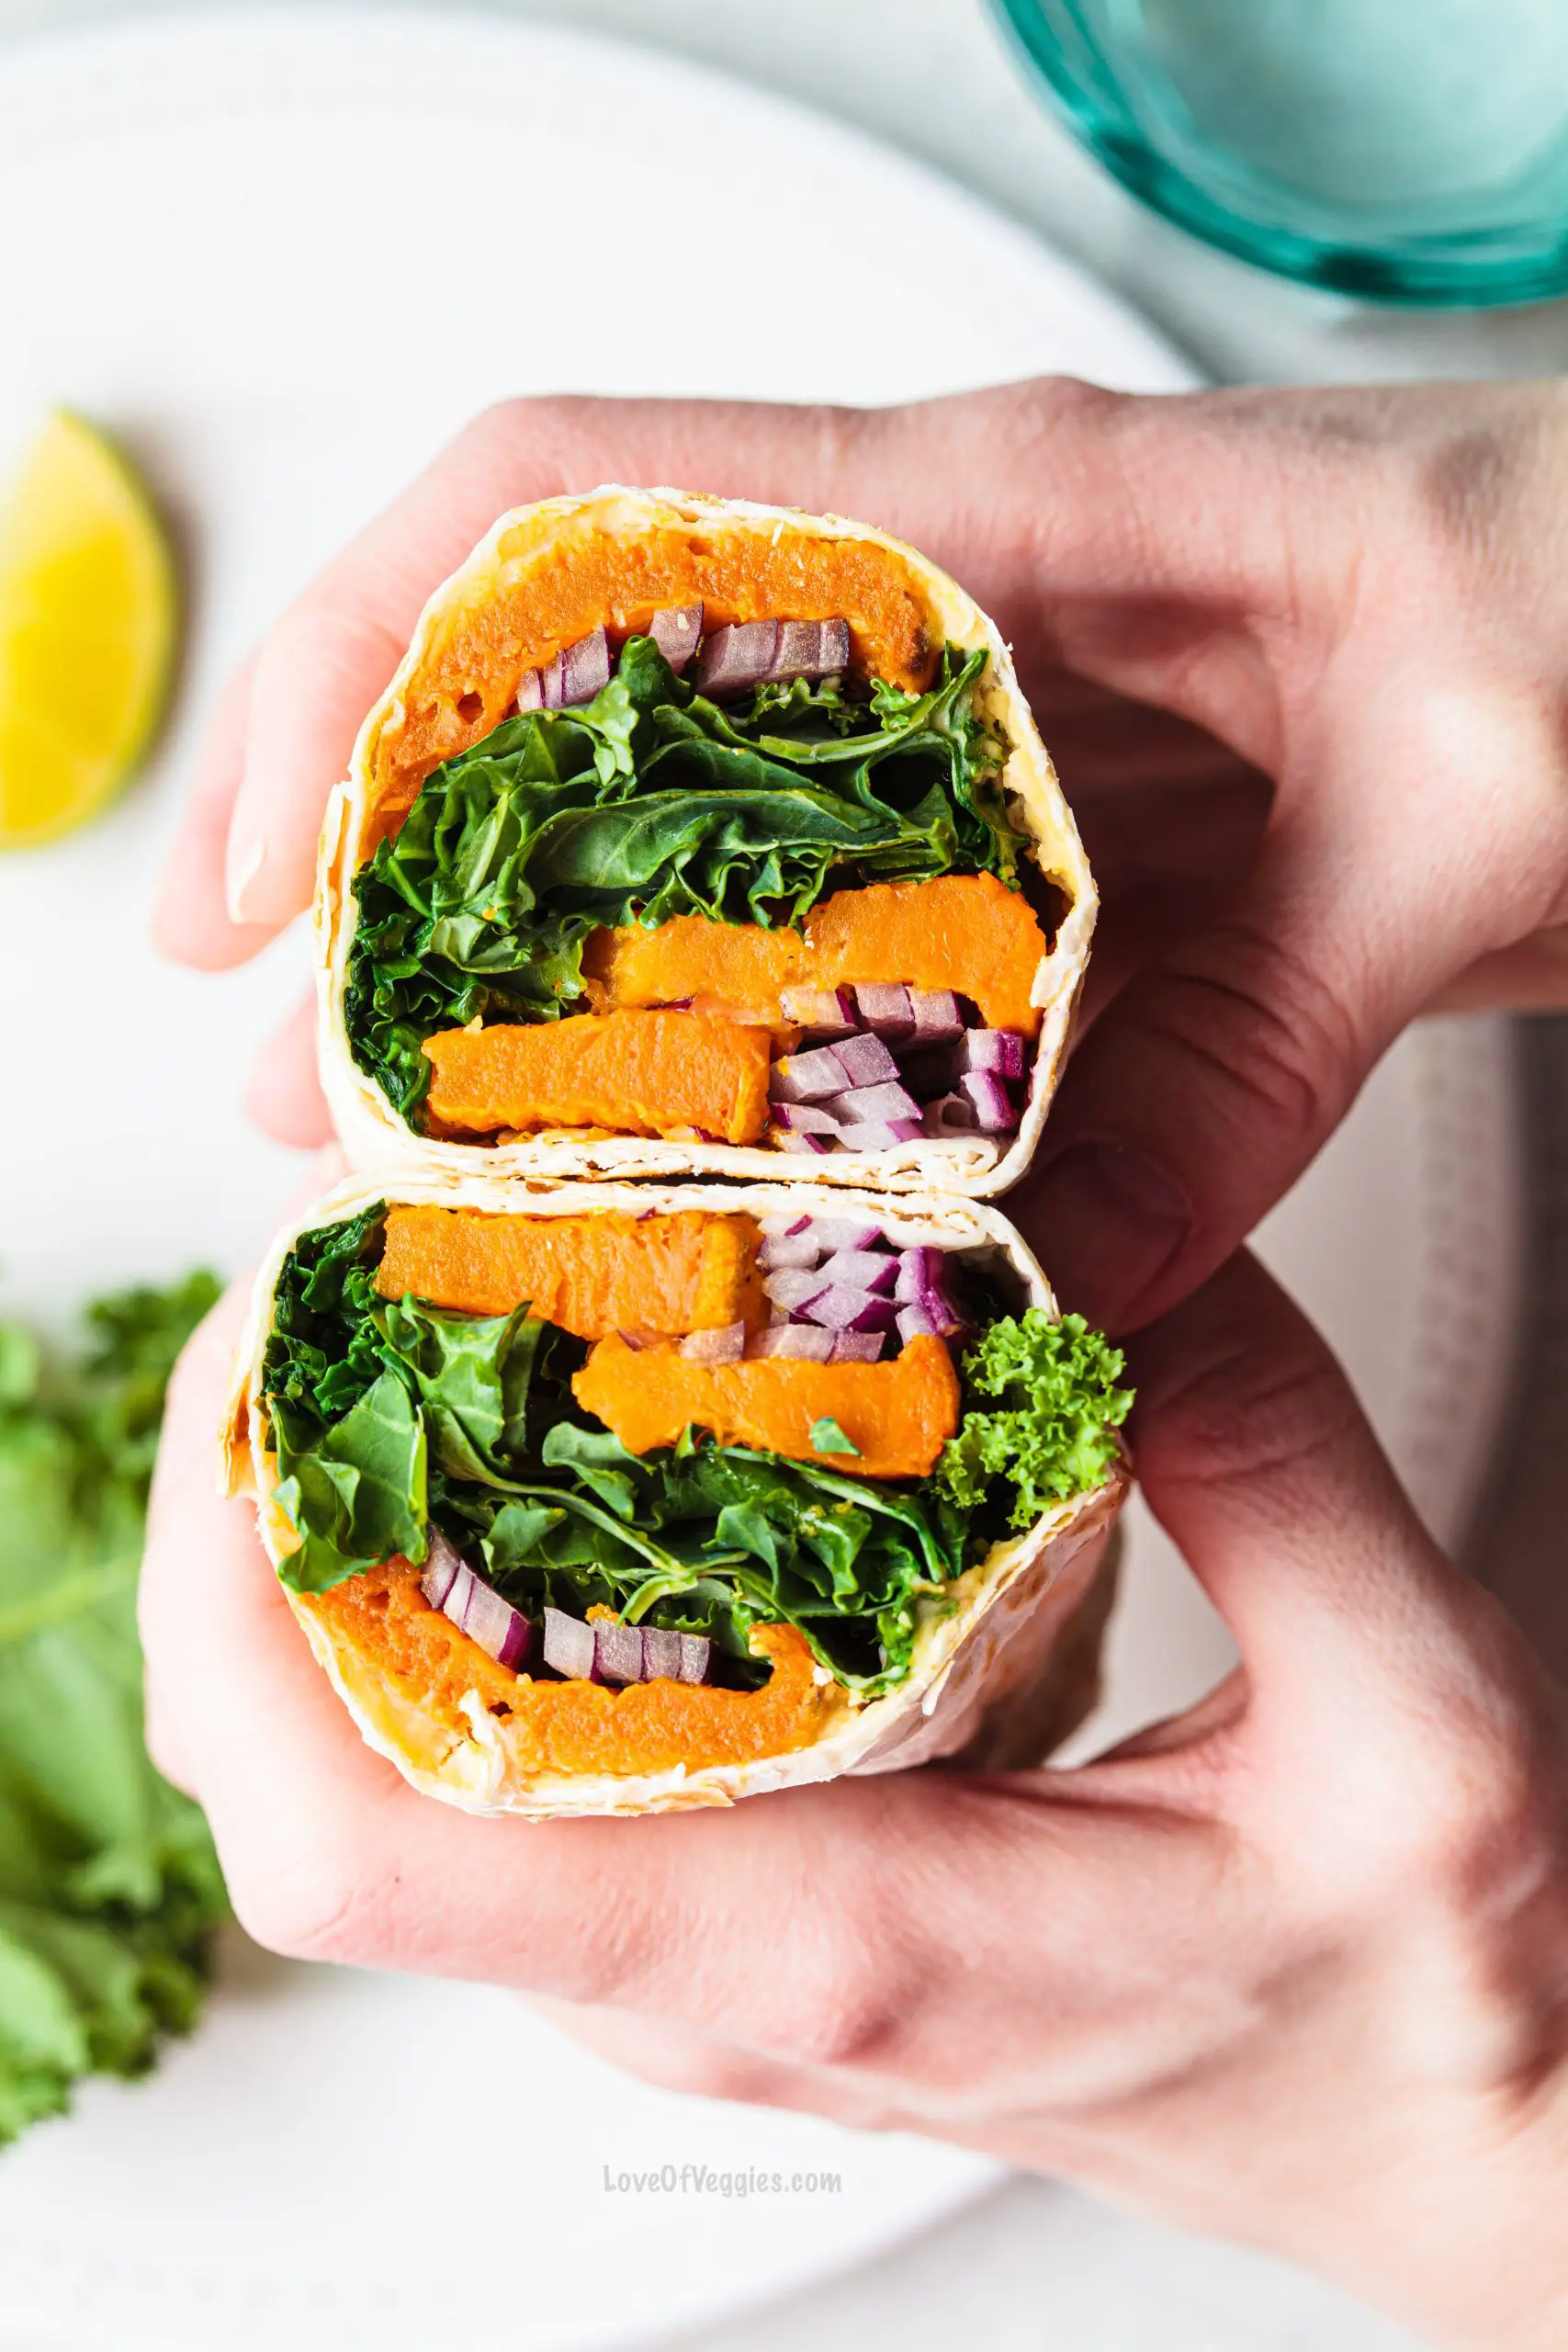 Sweet Potato and Kale Lunch Wraps